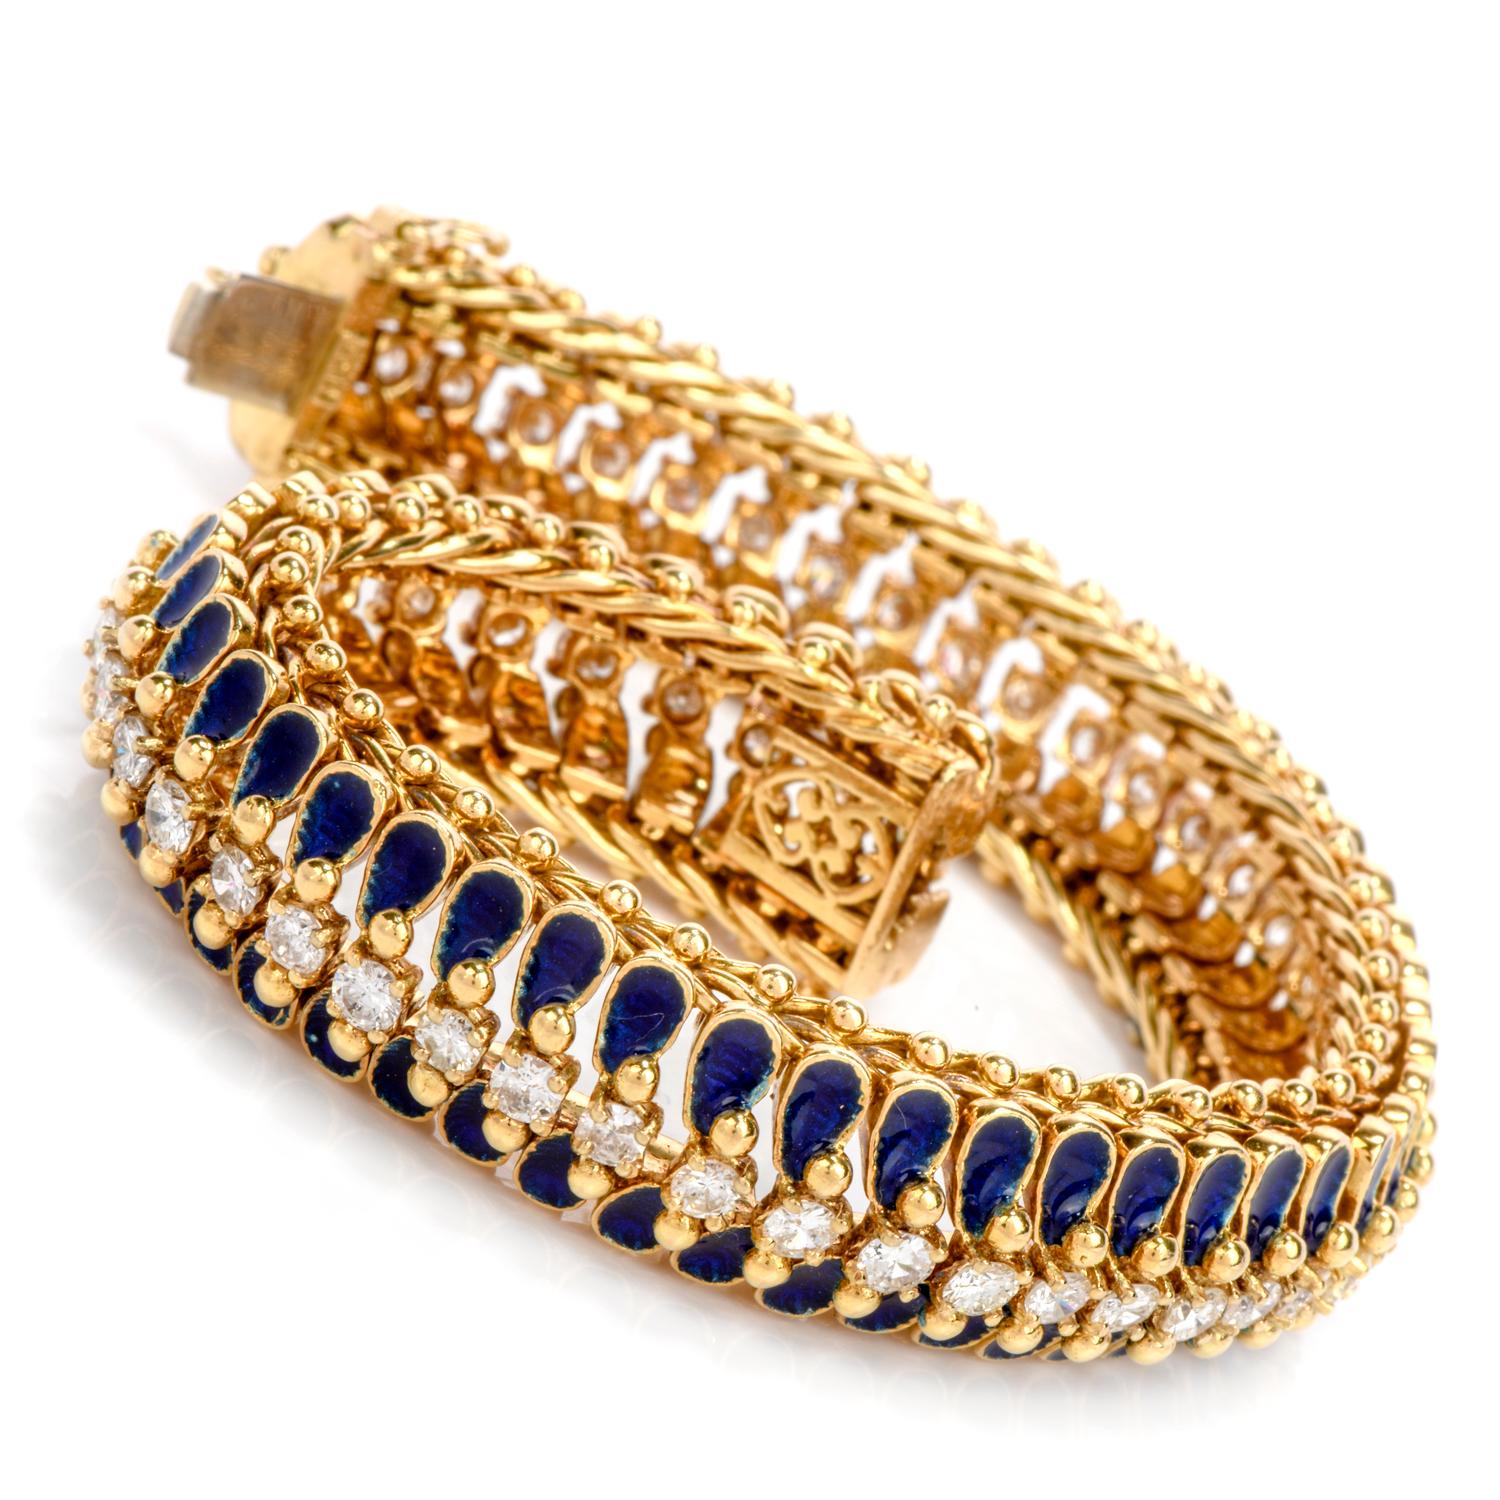 Live in memories of an era gone by in this majestic

Harlequin styled bracelet crafted in 18K yellow gold.

The 55 billowing links of the vintage bracelet each feature one round

faceted bright white, sparkling diamond in the center.

On either side